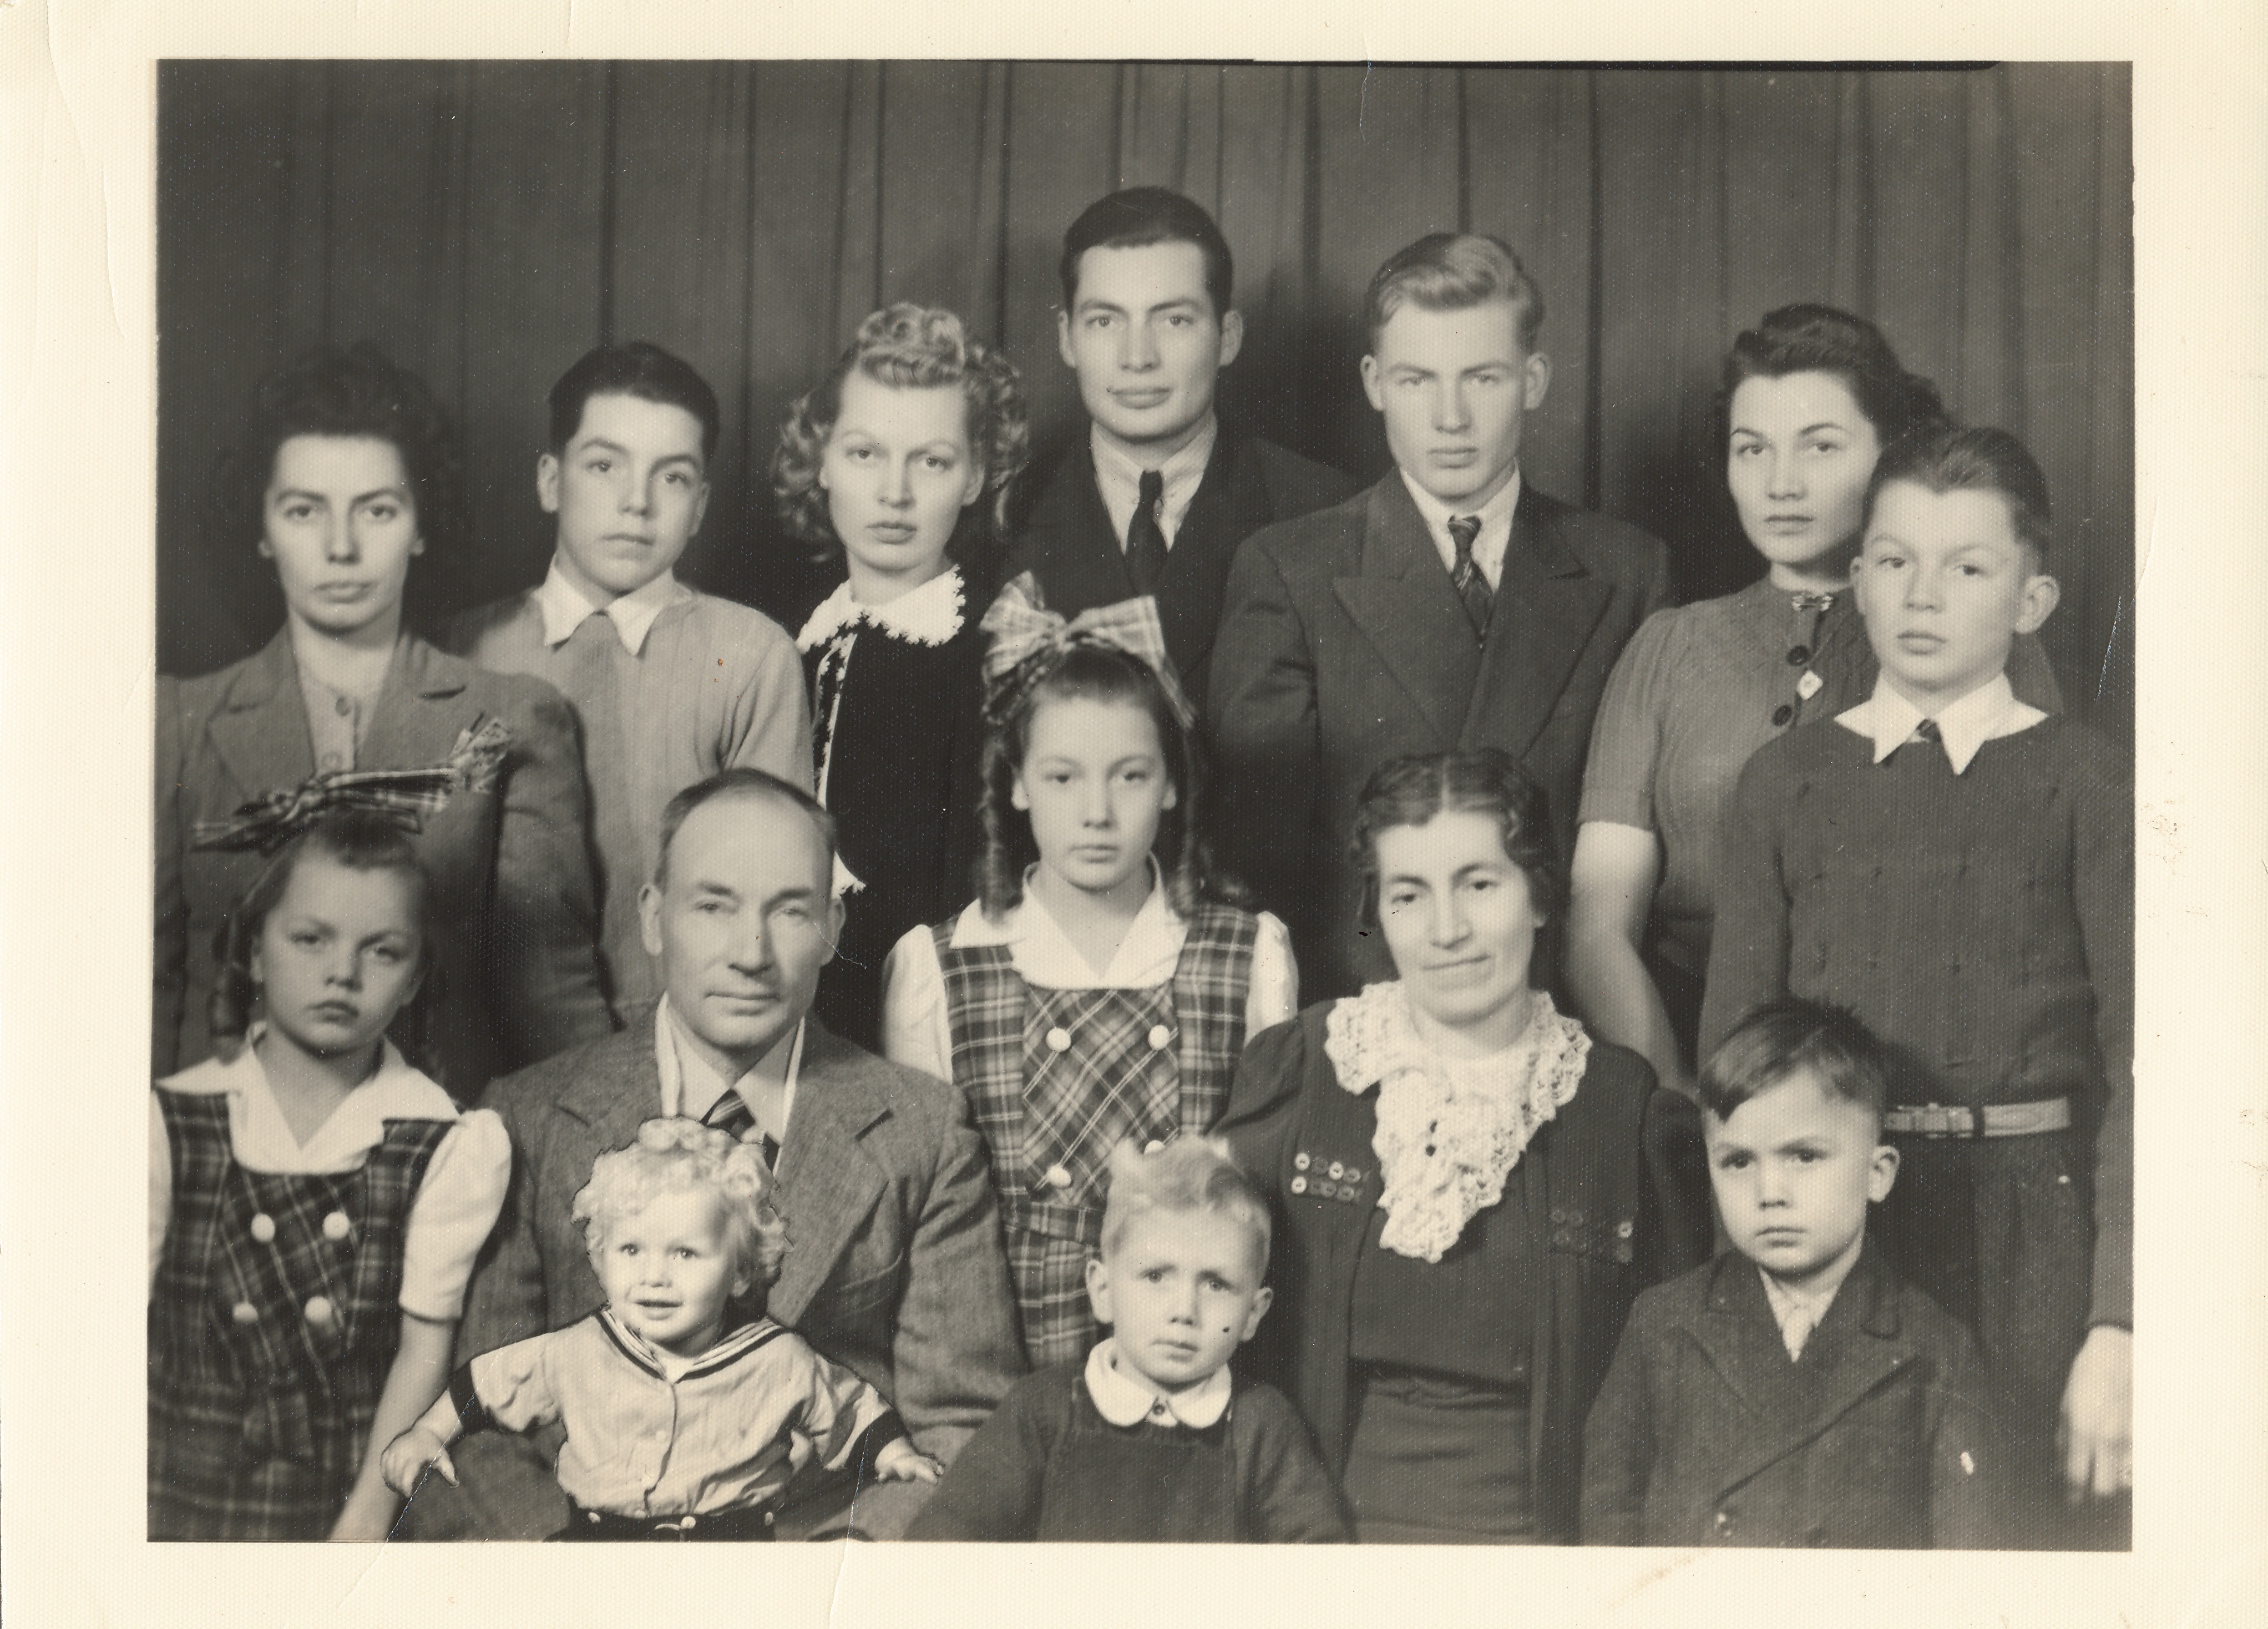 8. Great Grandma Gudrun and Great Grandpa Severin Linseth and their 12 children Edith Linseth Veeder is center in the plaid